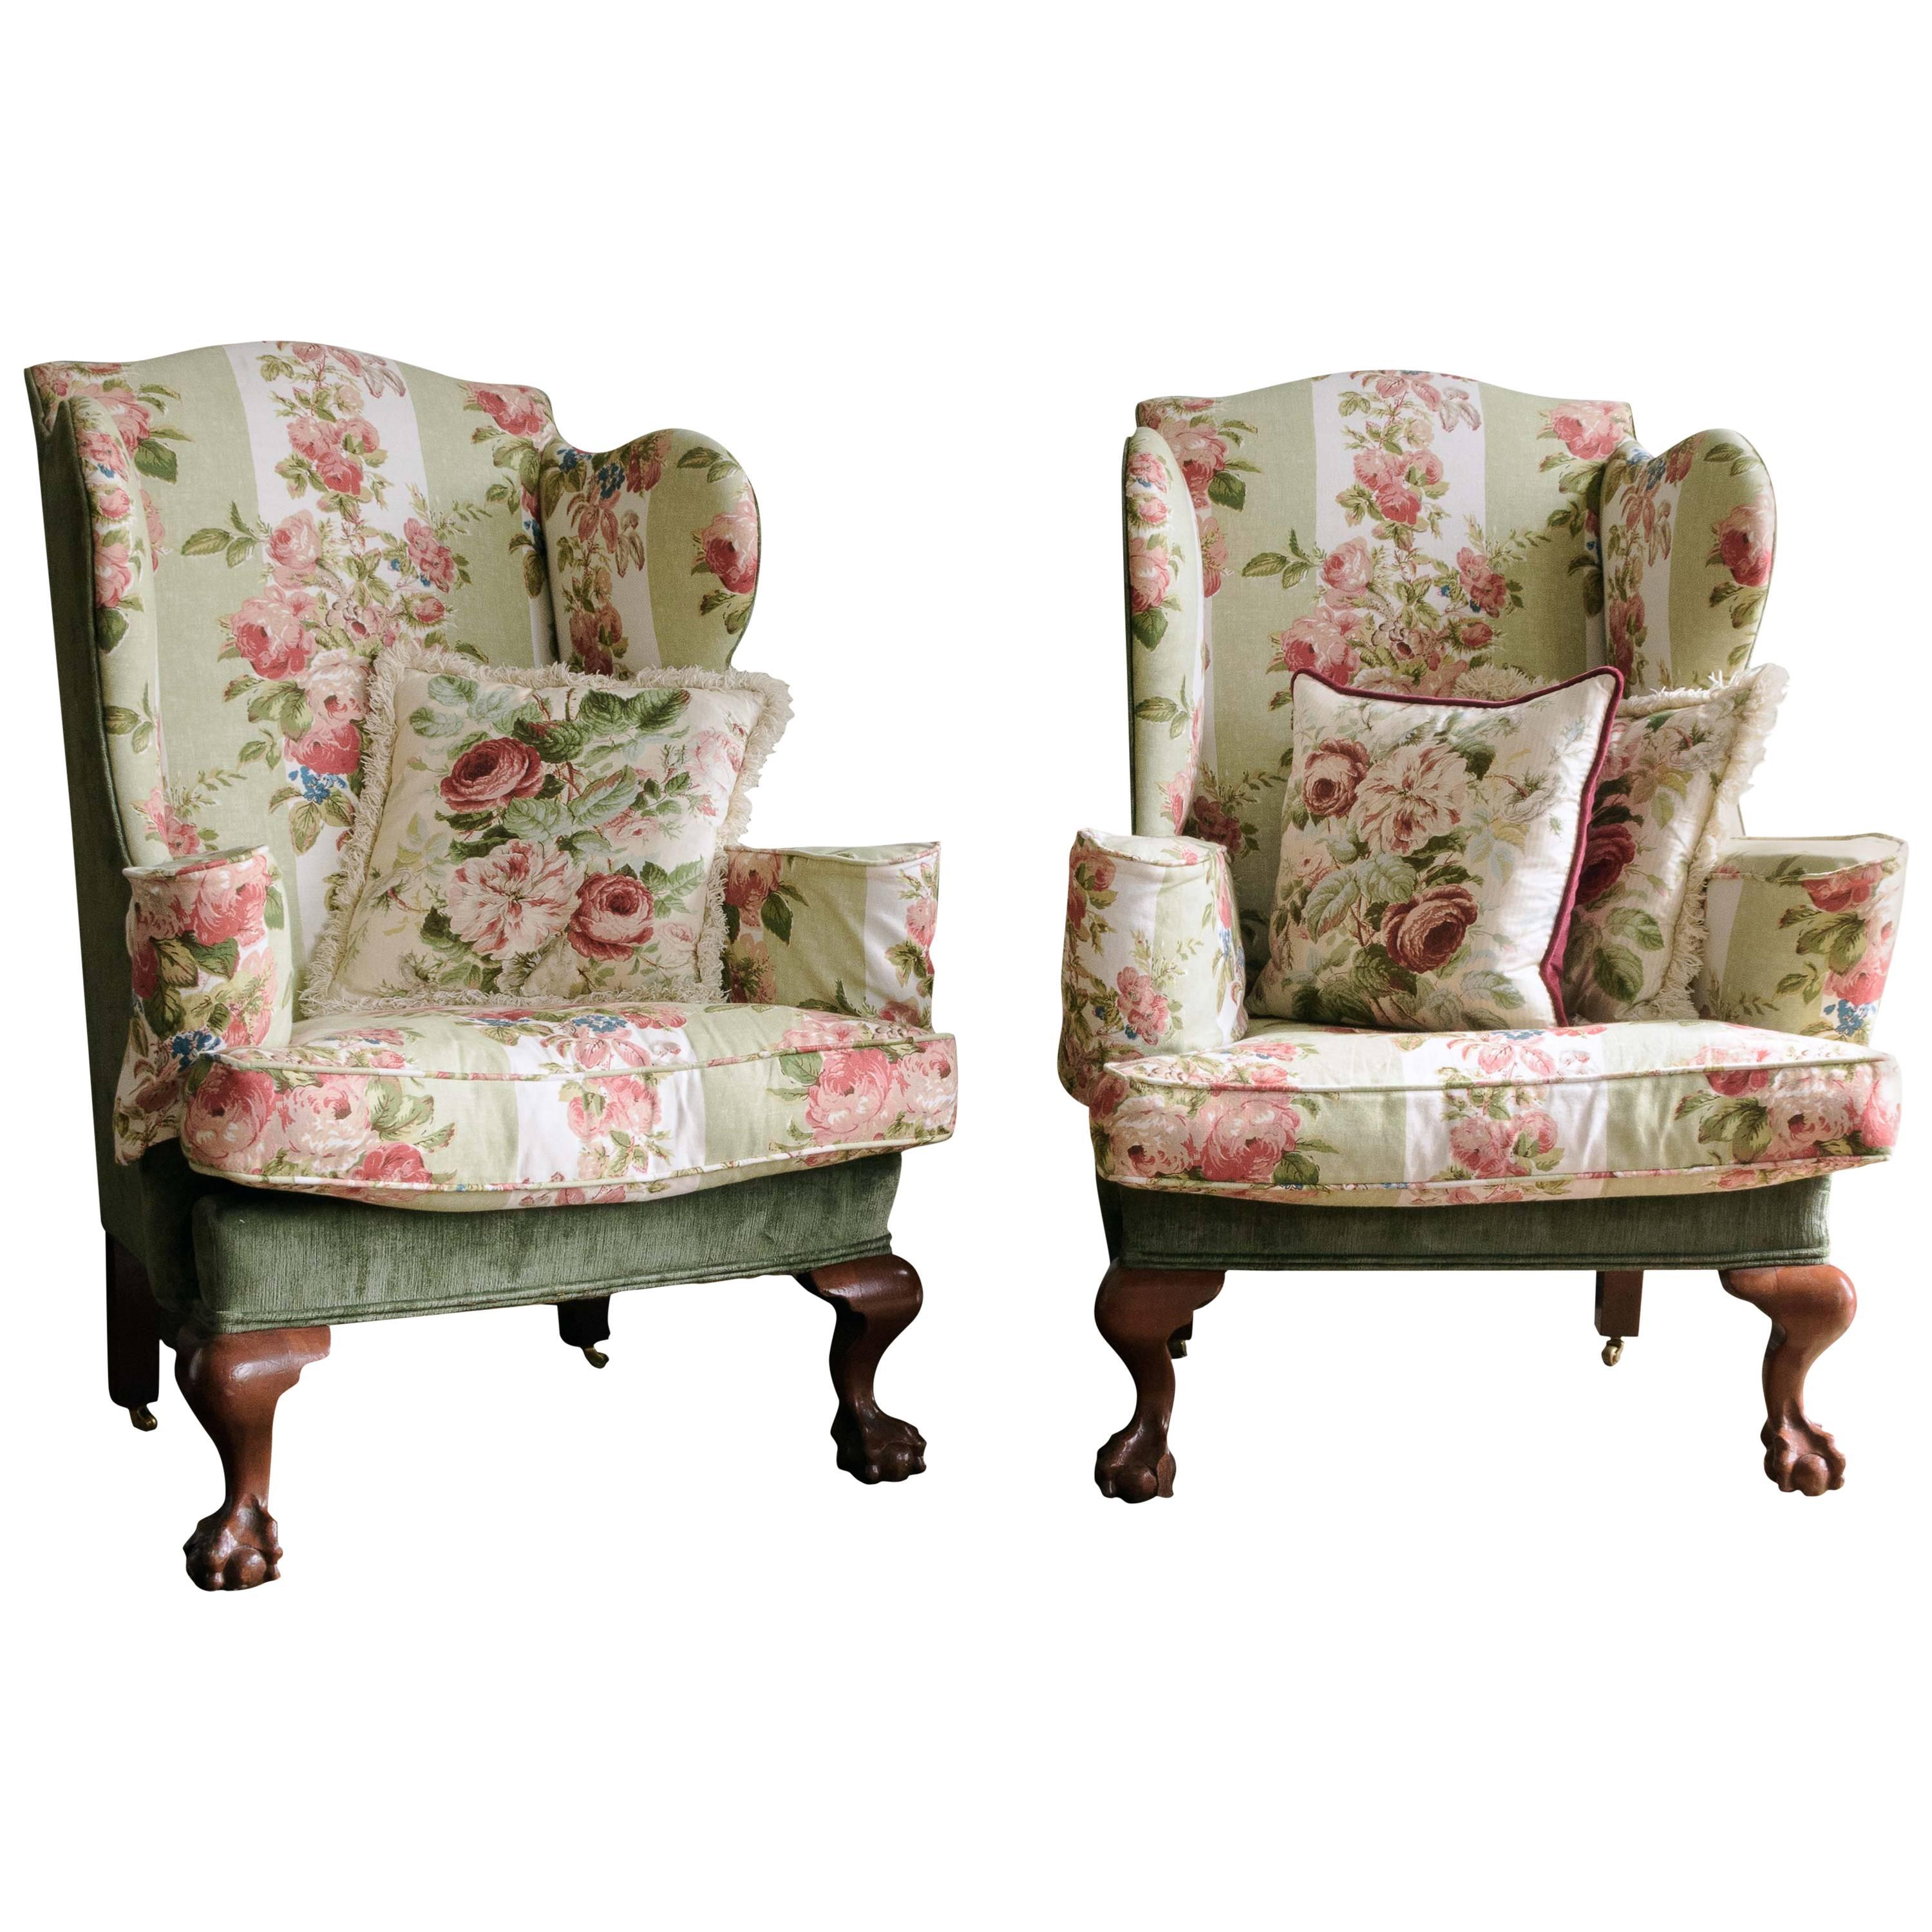 Pair of Early Georgian Style Wingback Armchairs